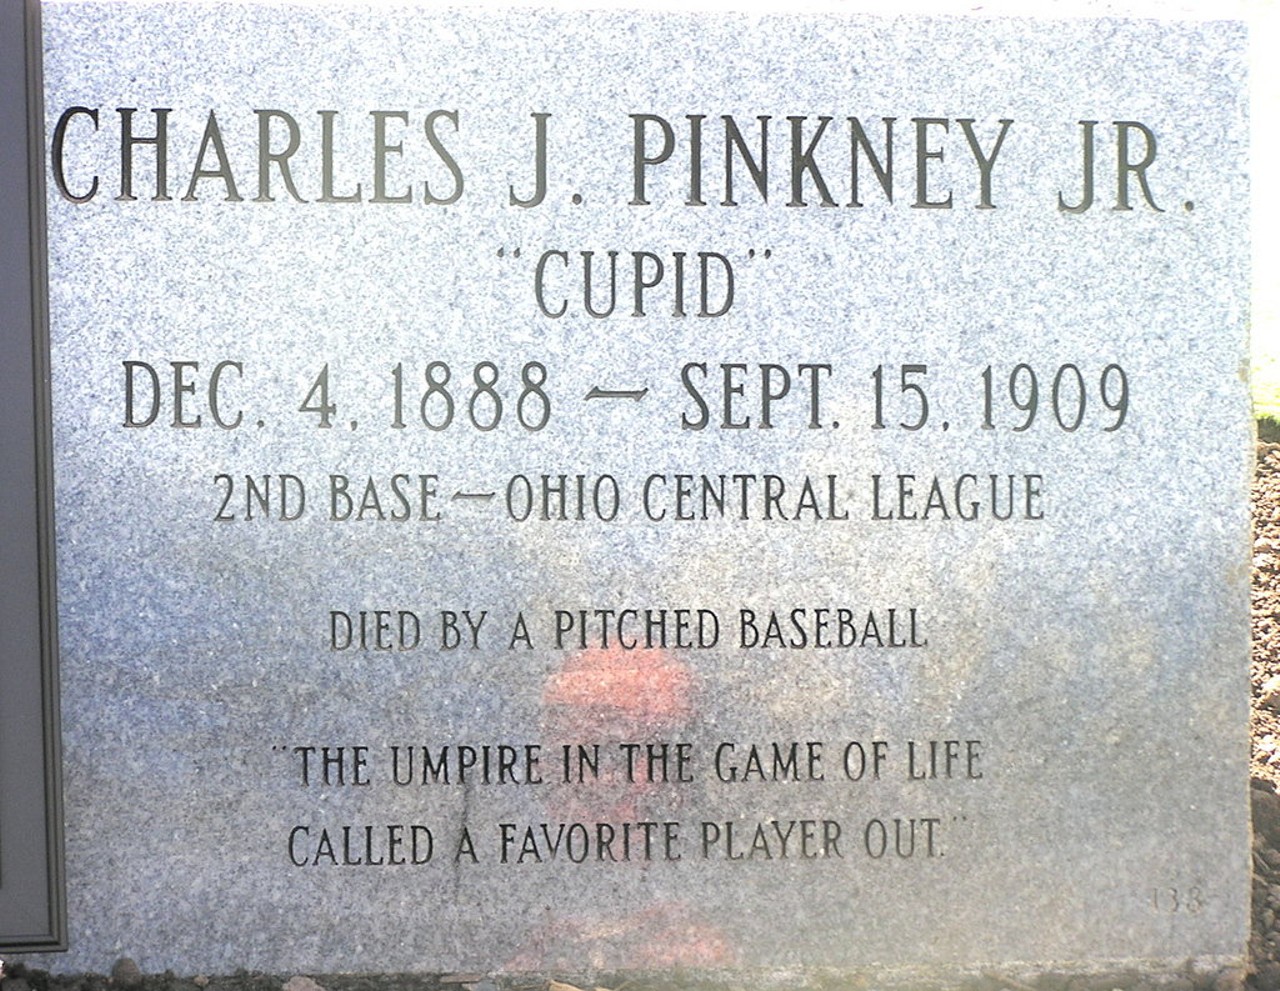 Lakeview Cemetery; Another baseball player to die from being hit by a pitch, only poor Cupid never made the majors. He played second base for the Ohio Central League and was a reported fan favorite; finally received headstone at Lakeview in 2010.